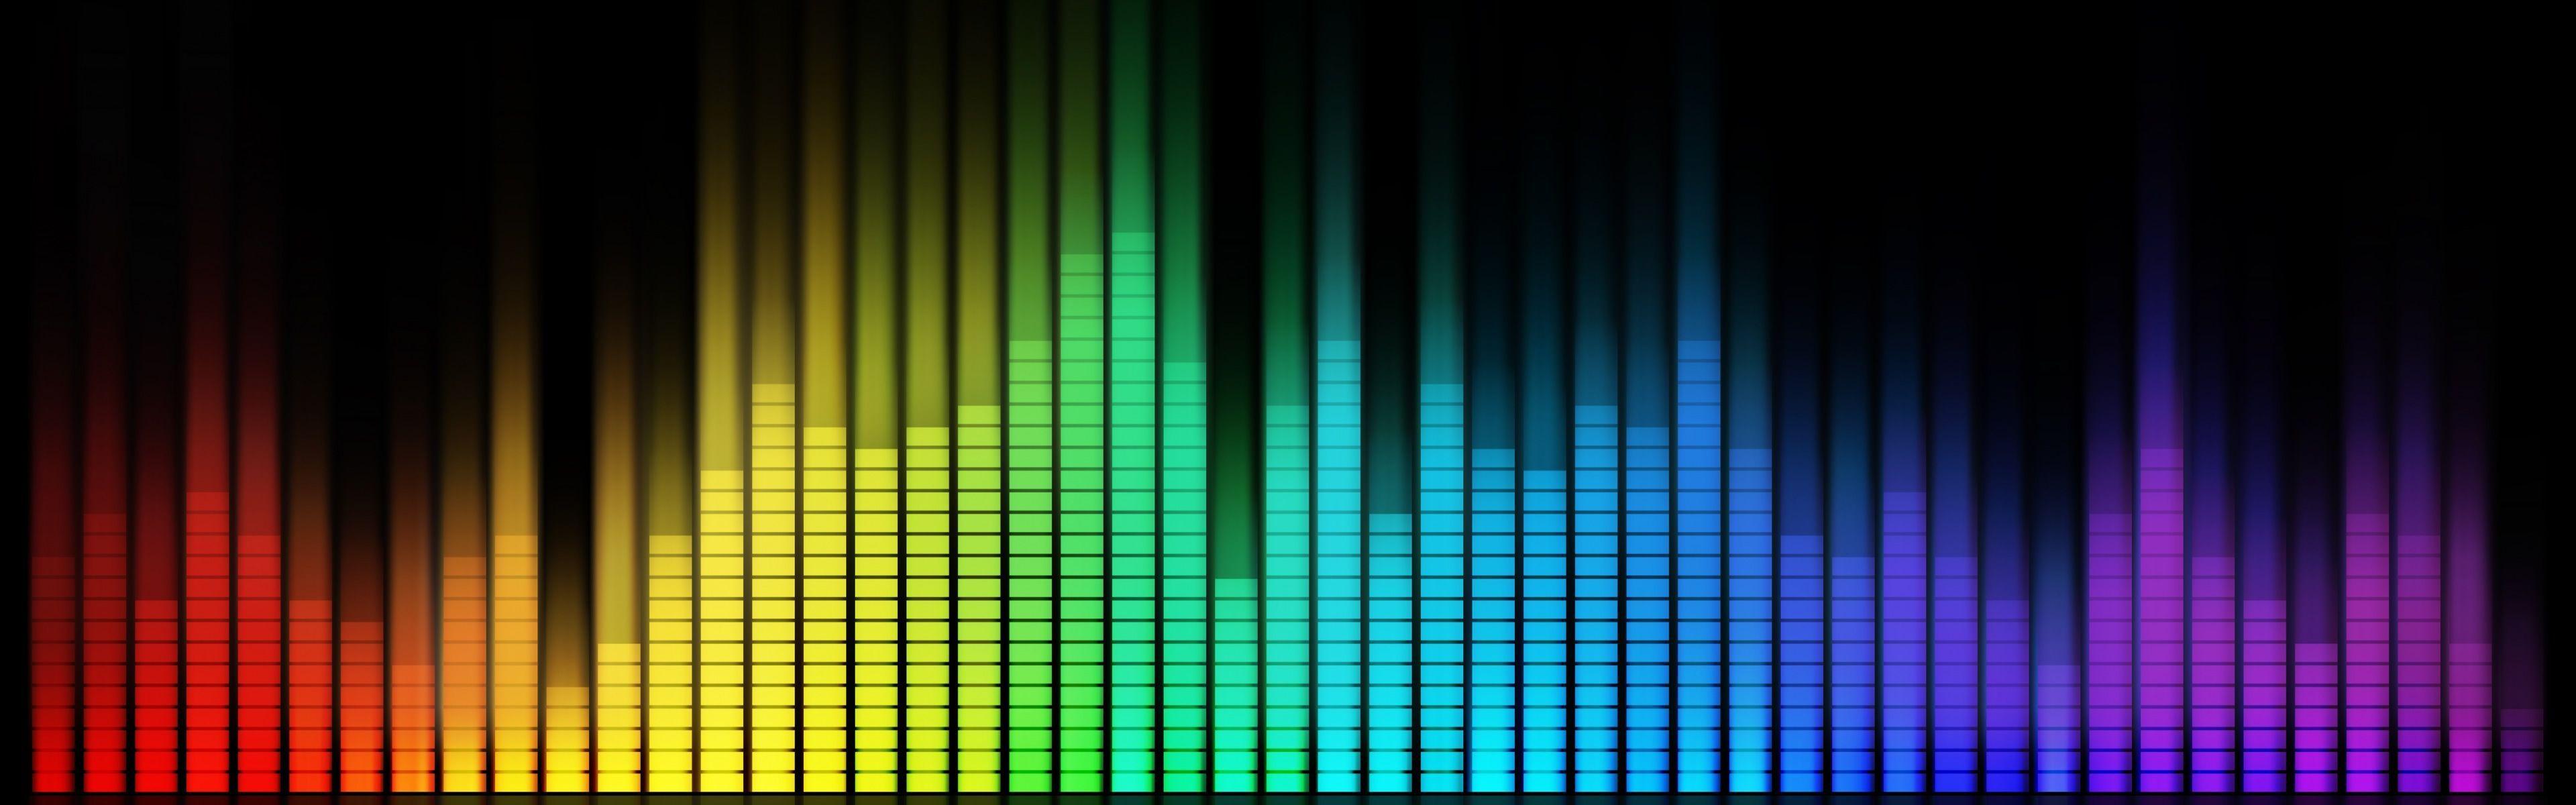 Music equalizer for pc free download